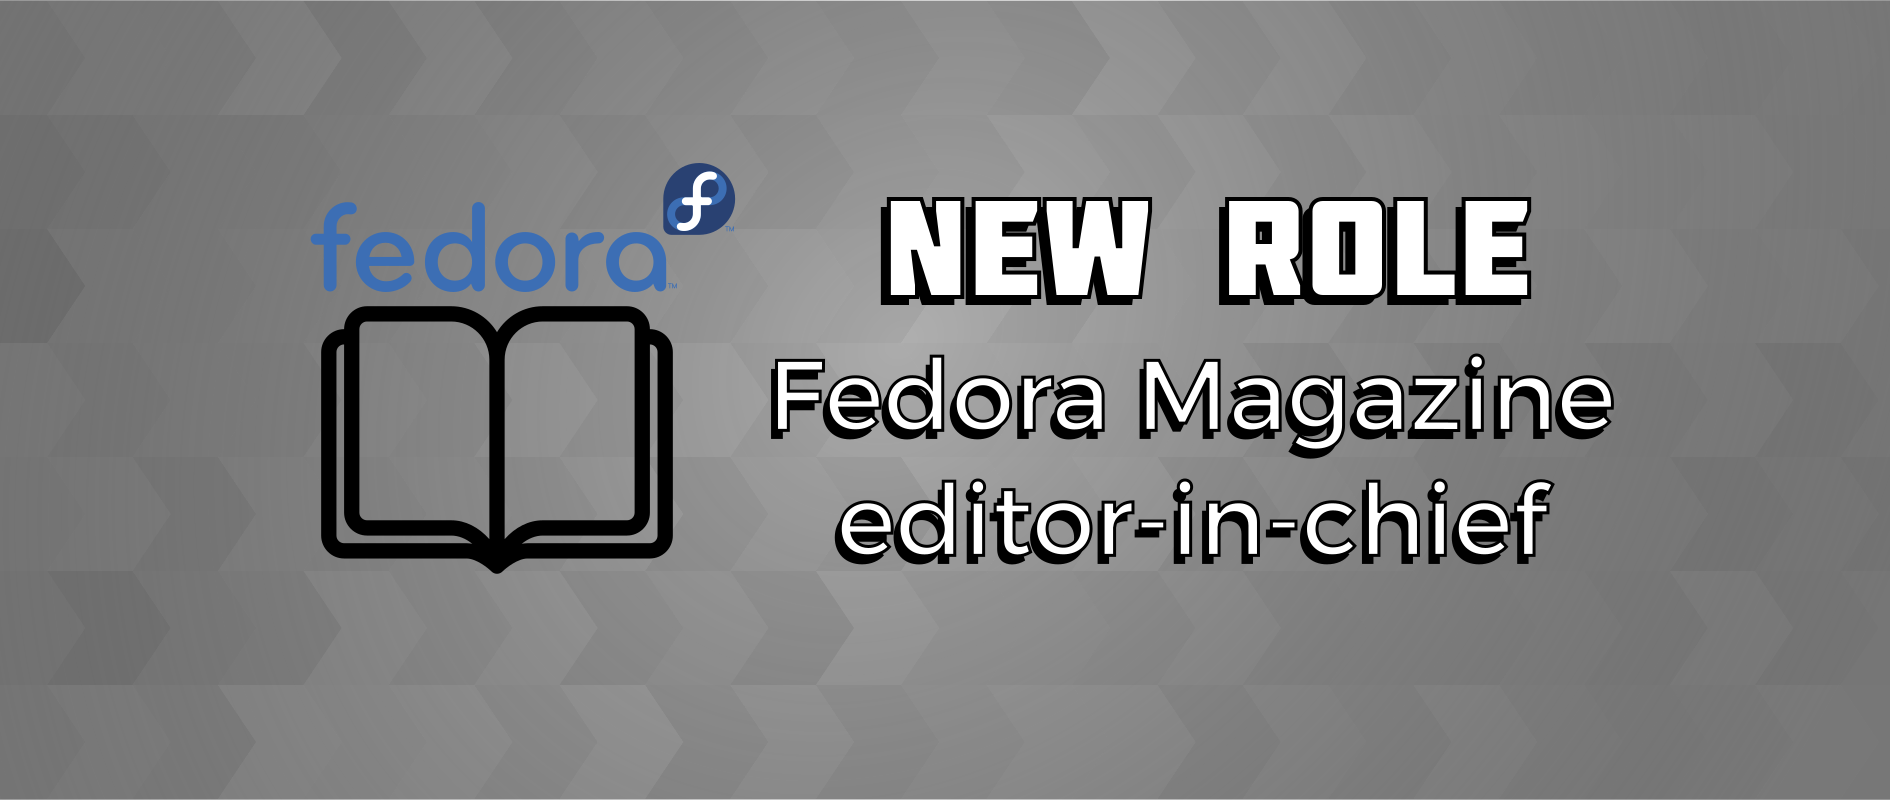 New role as Fedora Magazine editor in chief